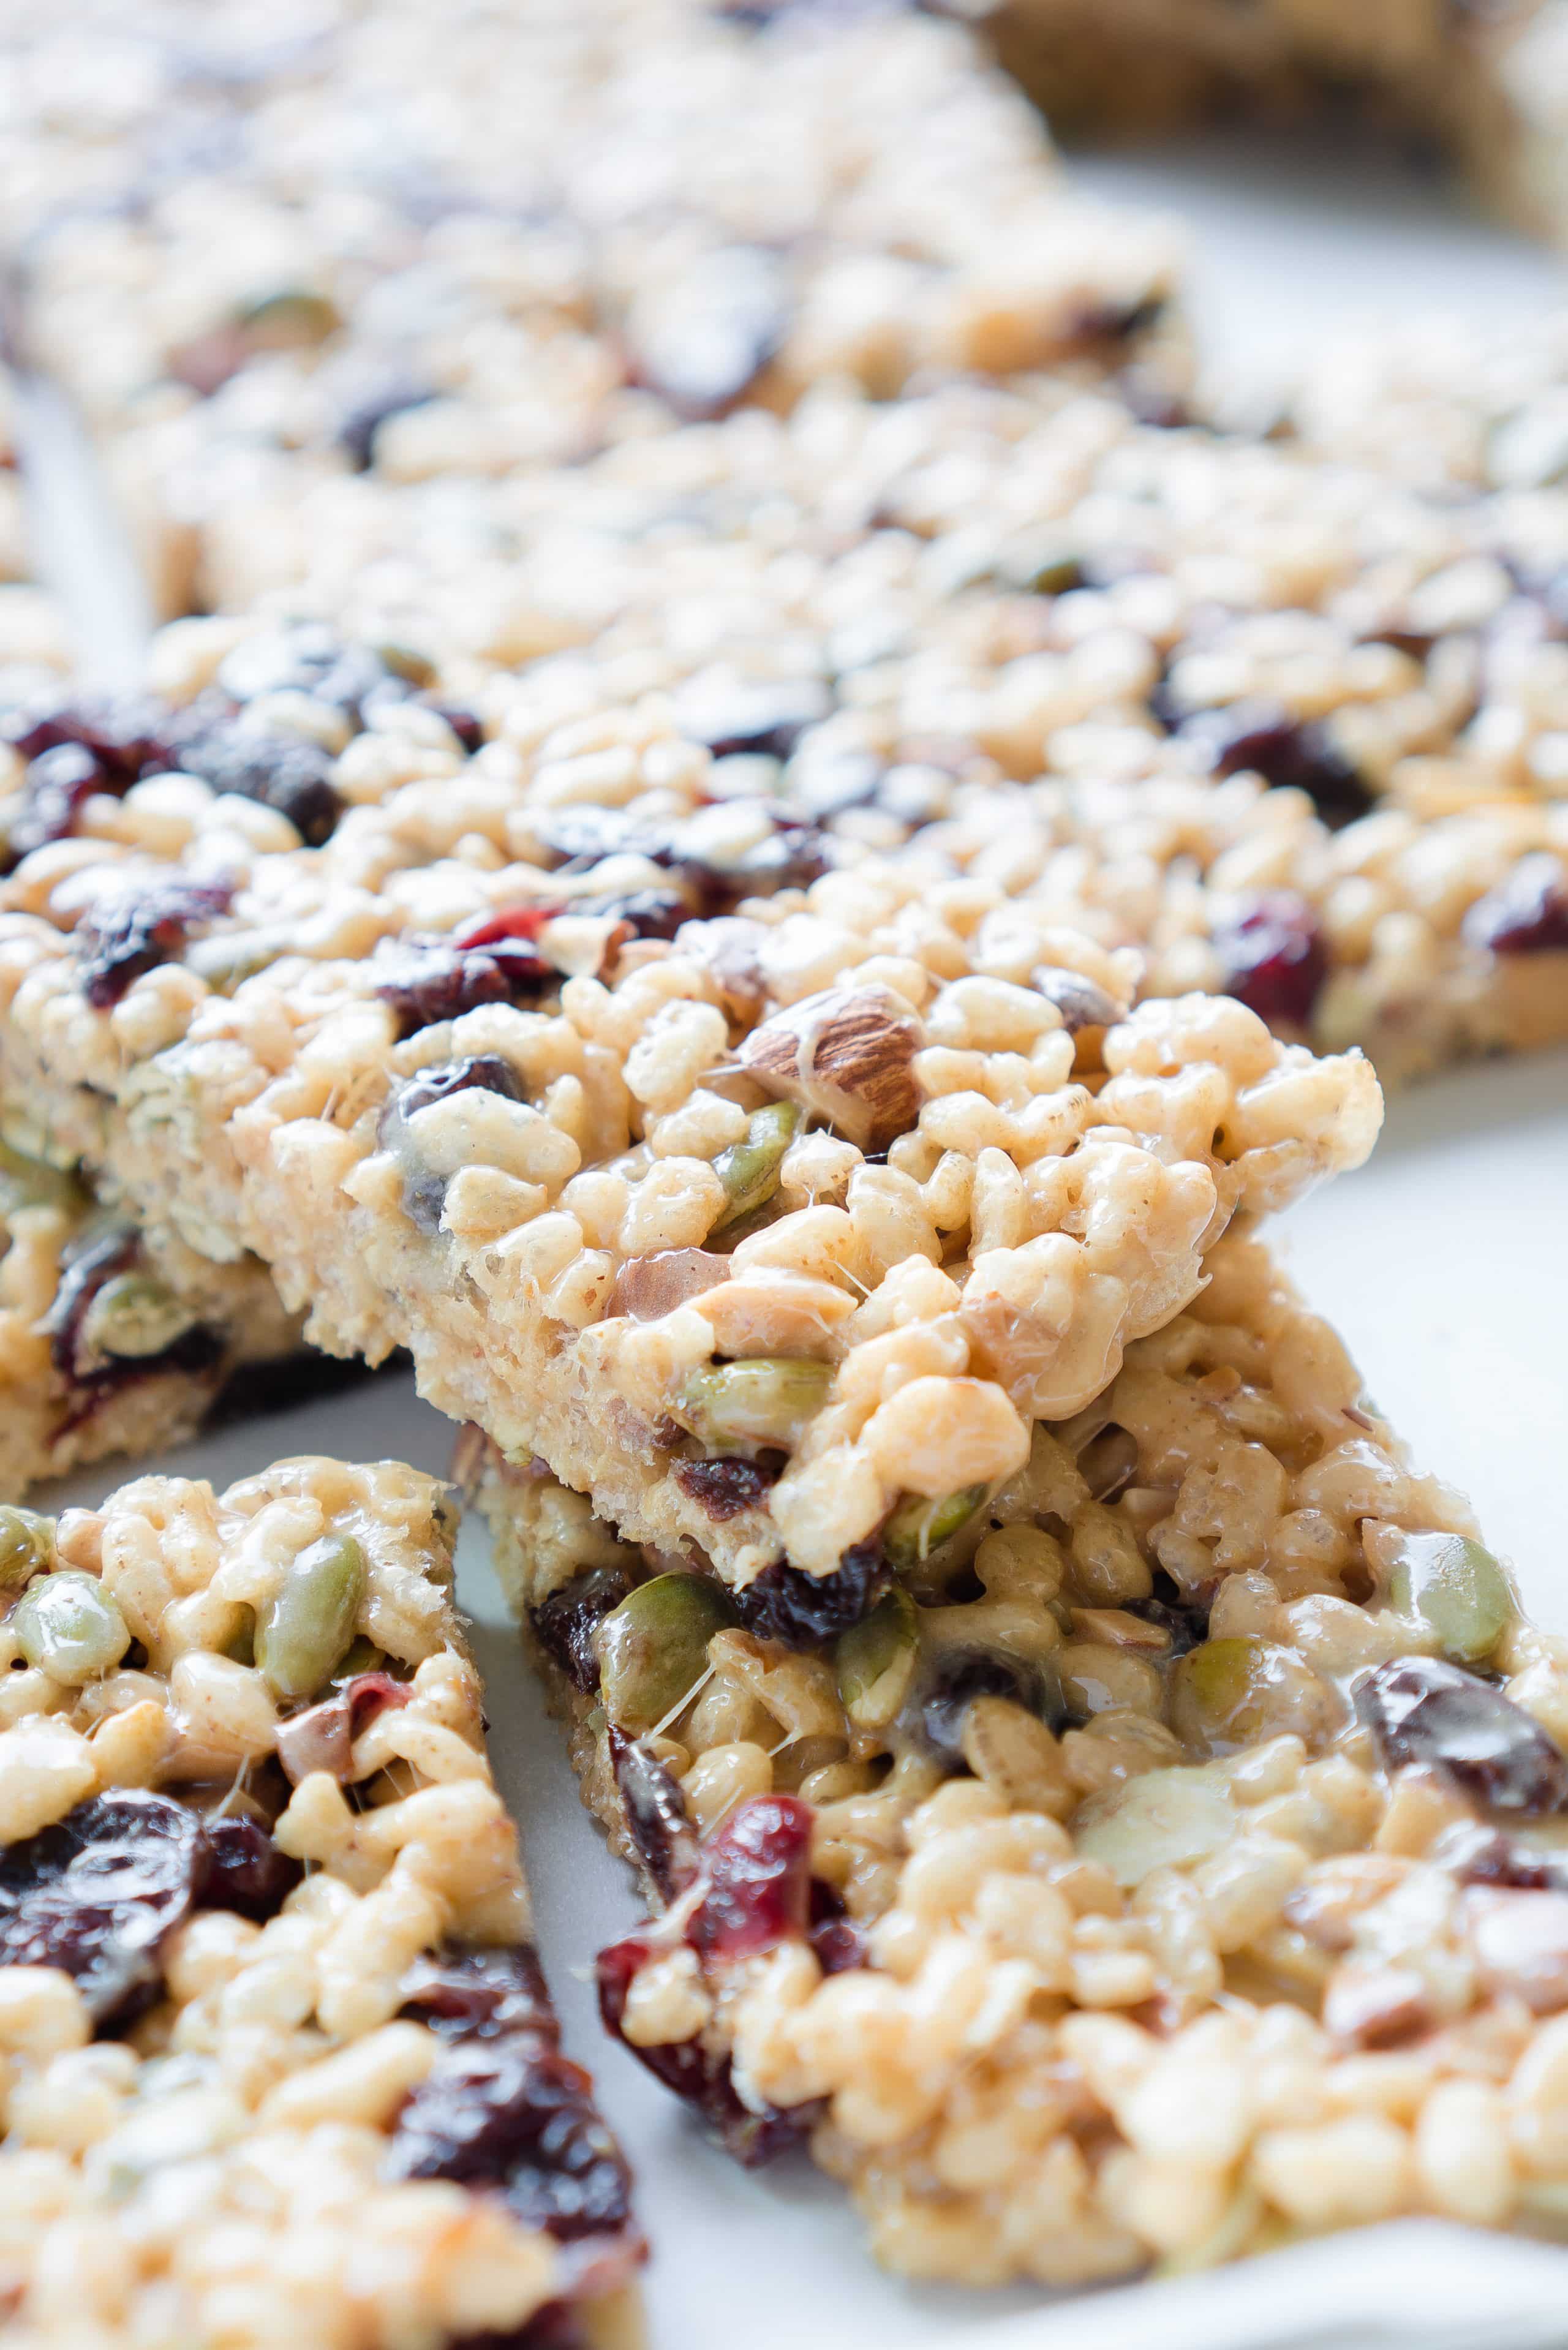 Peanut Butter Trail Mix Bars – Healthy recipe for Peanut Butter Trail Mix Bars! Uses toasted almonds, pepitas, dried cranberries, tart dried cherries, brown rice cereal, creamy peanut butter, and marshmallows! We love that this no-bake recipe uses coconut oil instead of butter ♥ | freeyourfork.com